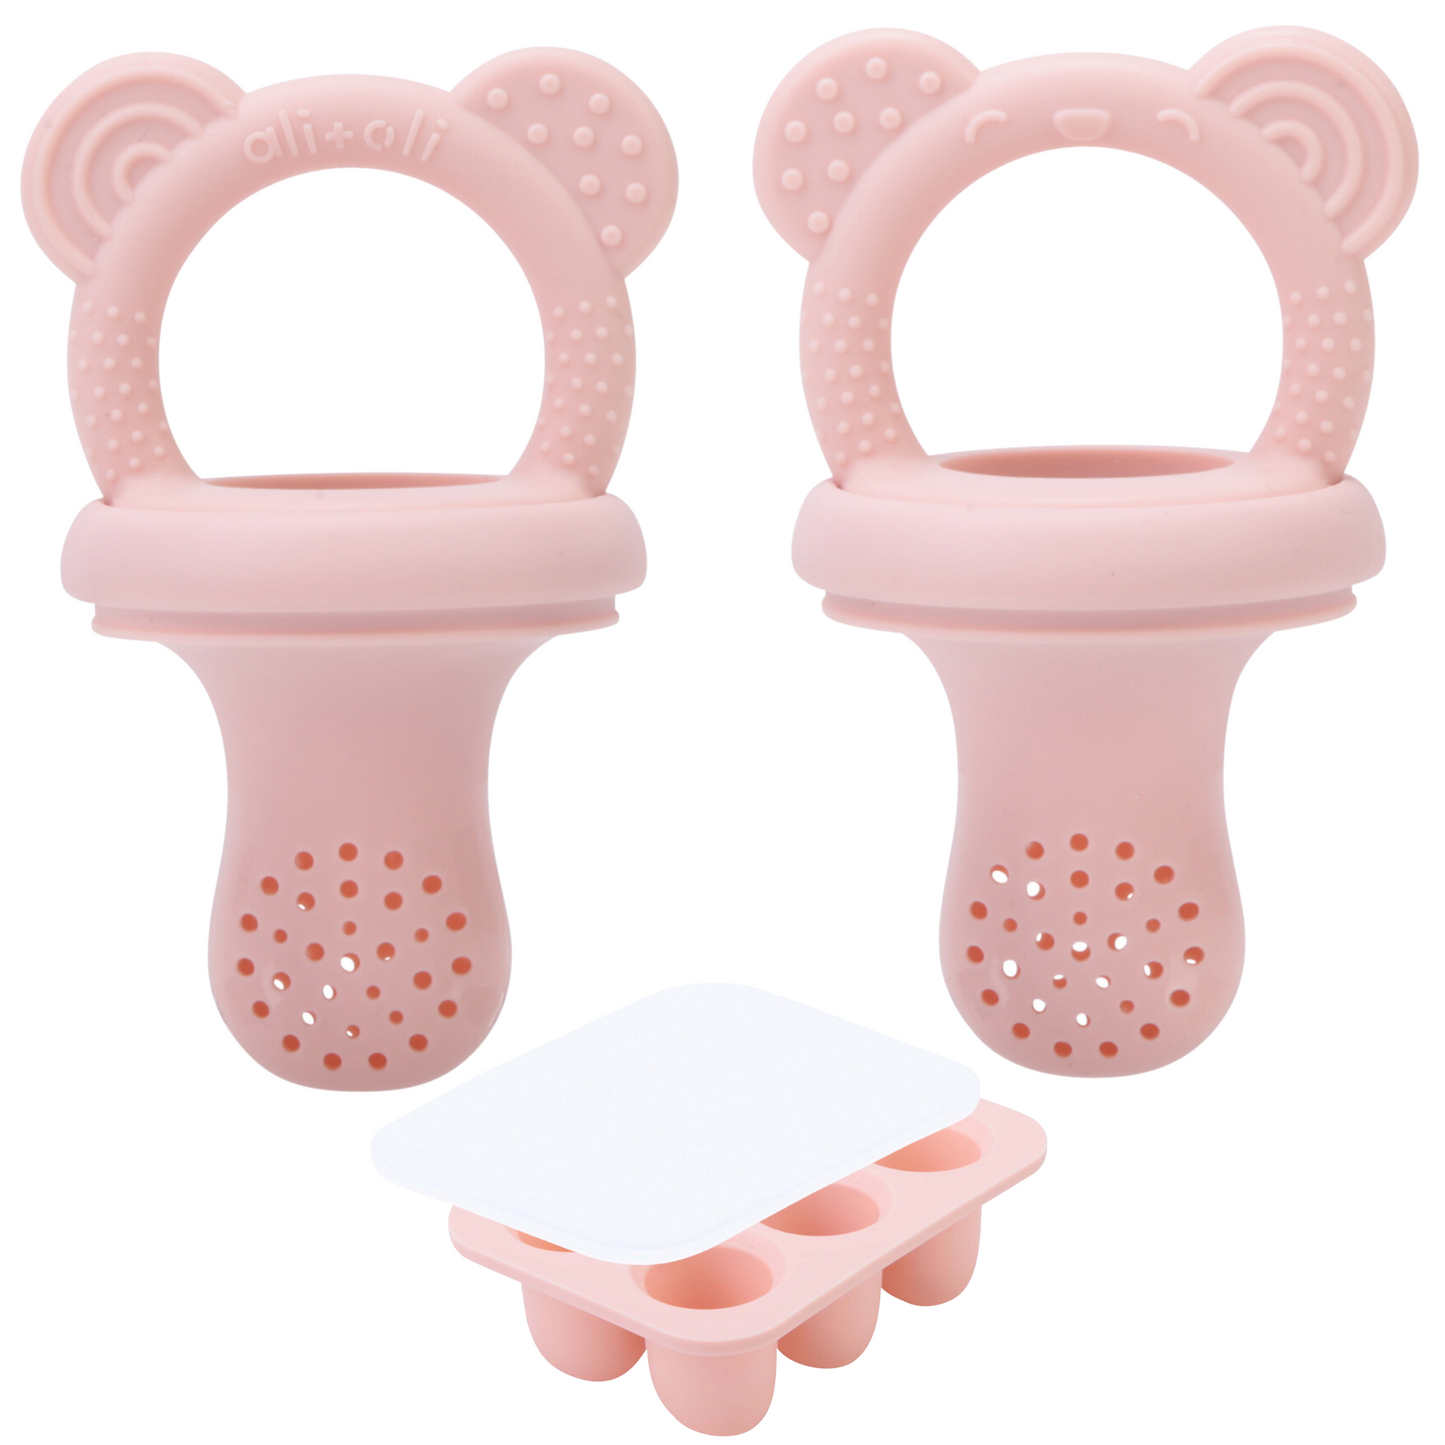 Food & Fruit Feeder Pacifier 3pc Set for Baby (Pink & Pink) with Freezer Tray